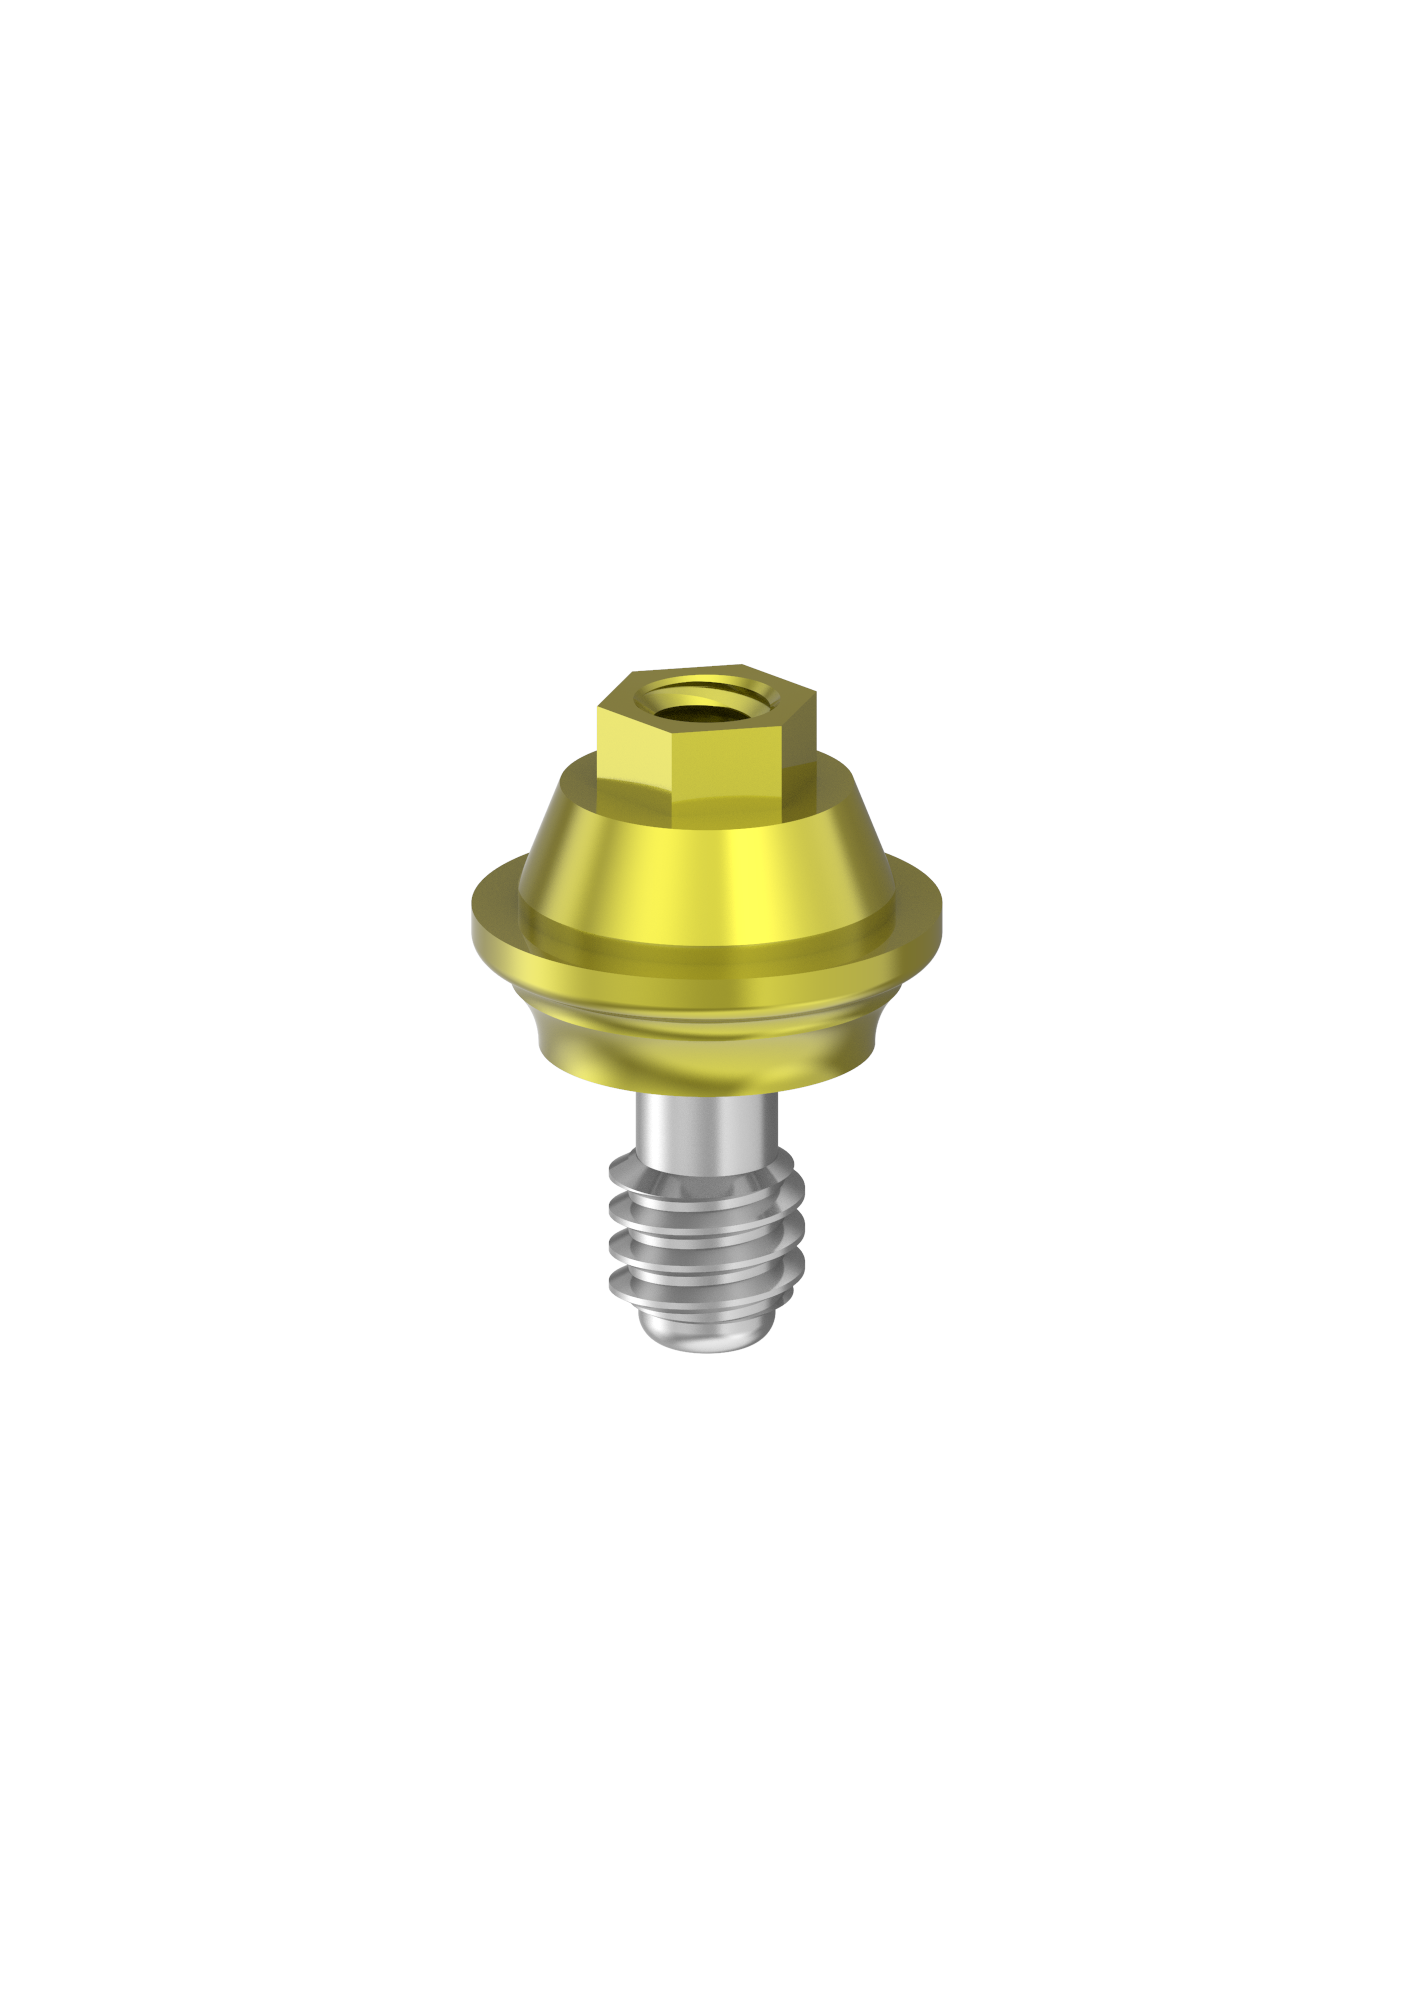 Compact Conical Abutment 3.25 x 1mm